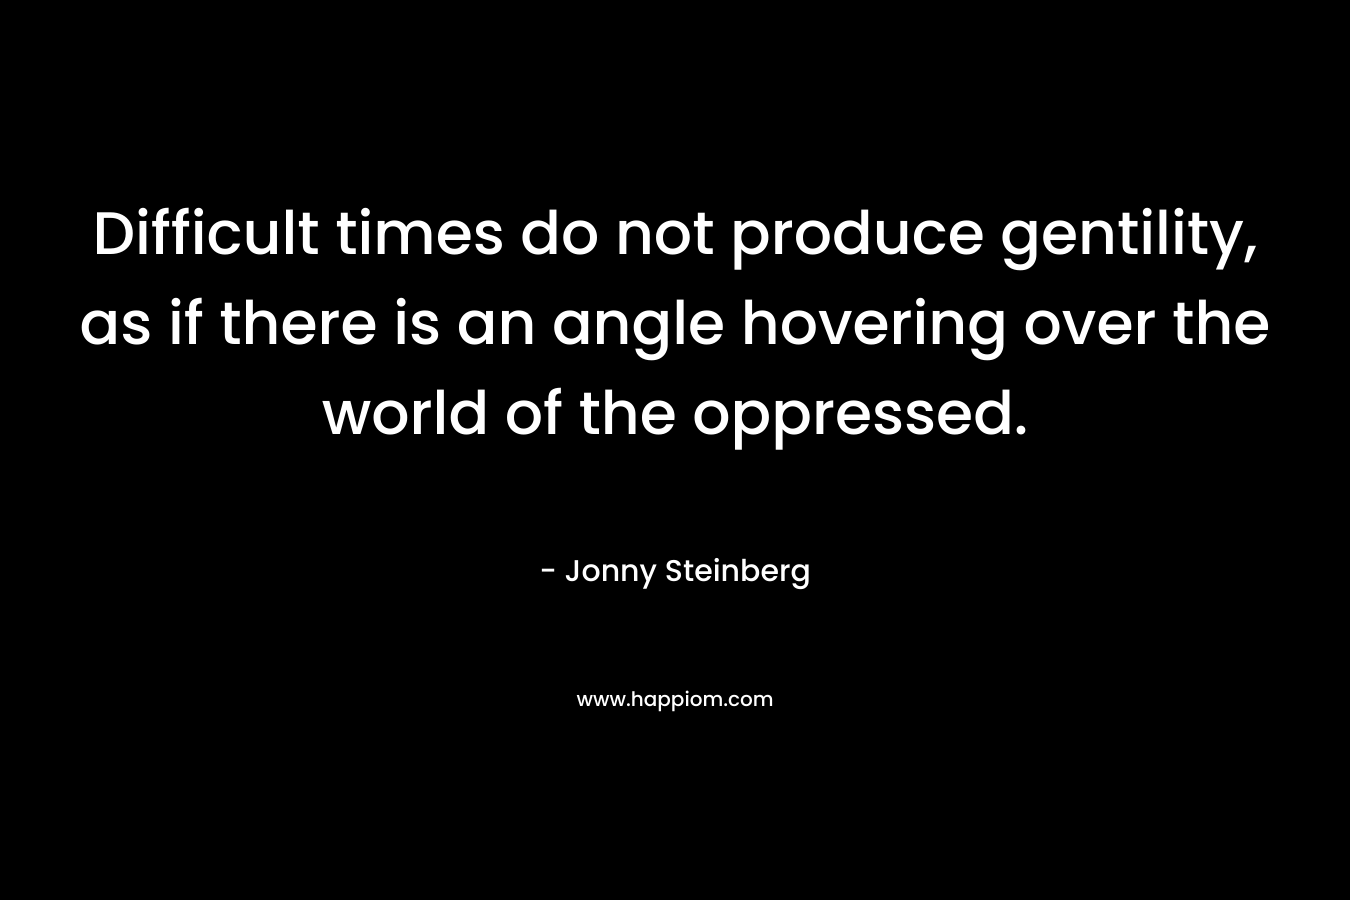 Difficult times do not produce gentility, as if there is an angle hovering over the world of the oppressed. – Jonny Steinberg